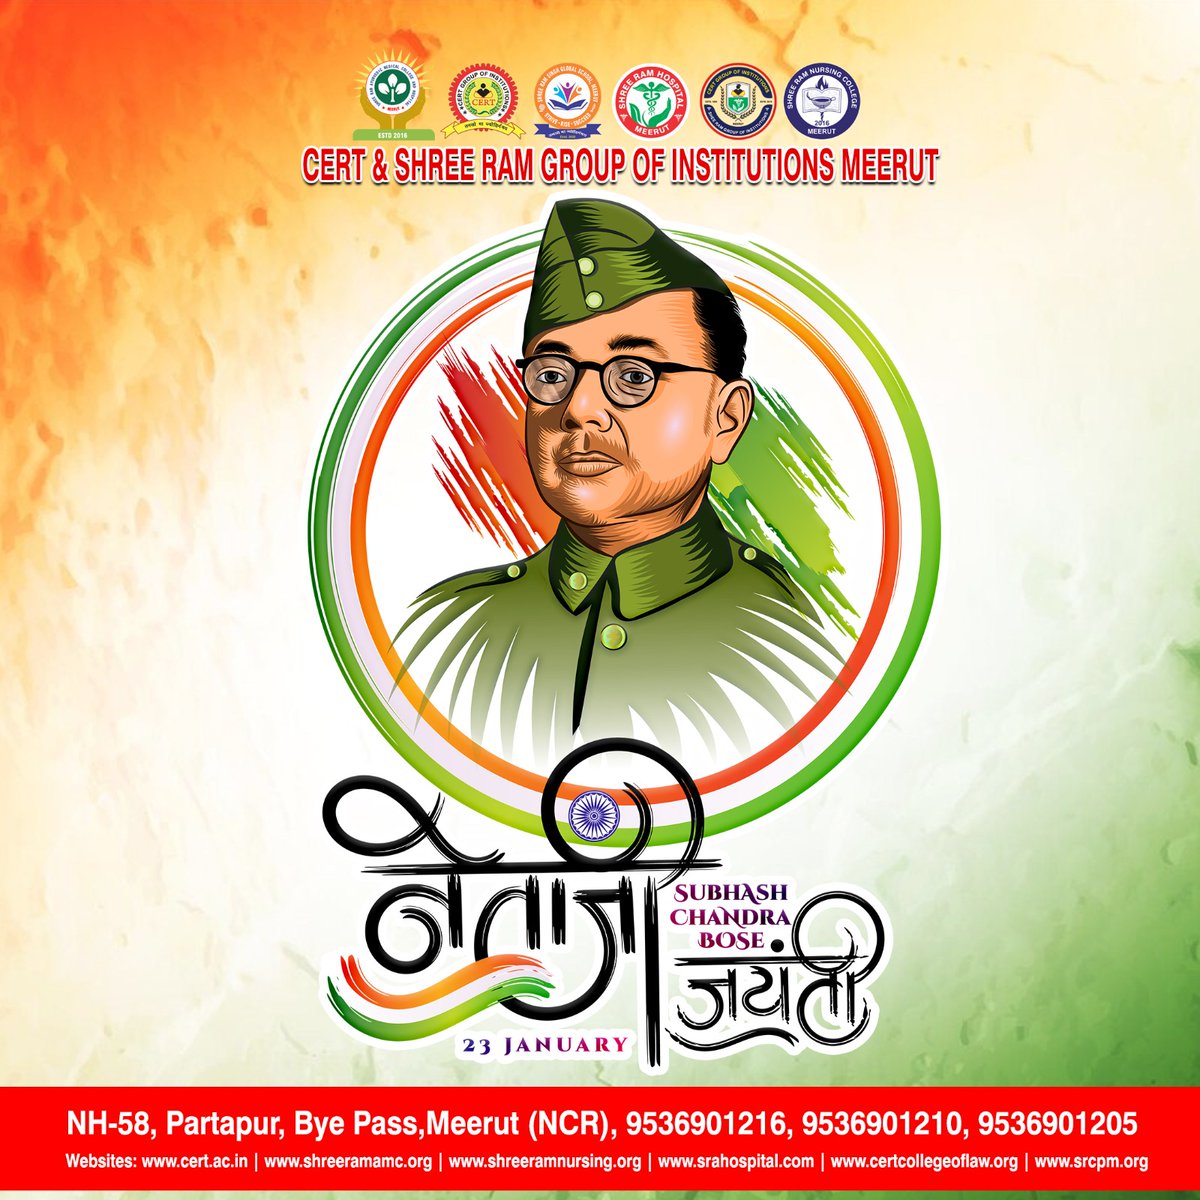 the birthday of the prominent Indian freedom fighter Netaji Subhas Chandra Bose. It is celebrated annually on 23 January. He played a pivotal role in Indian independence movement.
#bestcollege #bestcollegeinmeerut #SubhashChandraBose #JaiHind